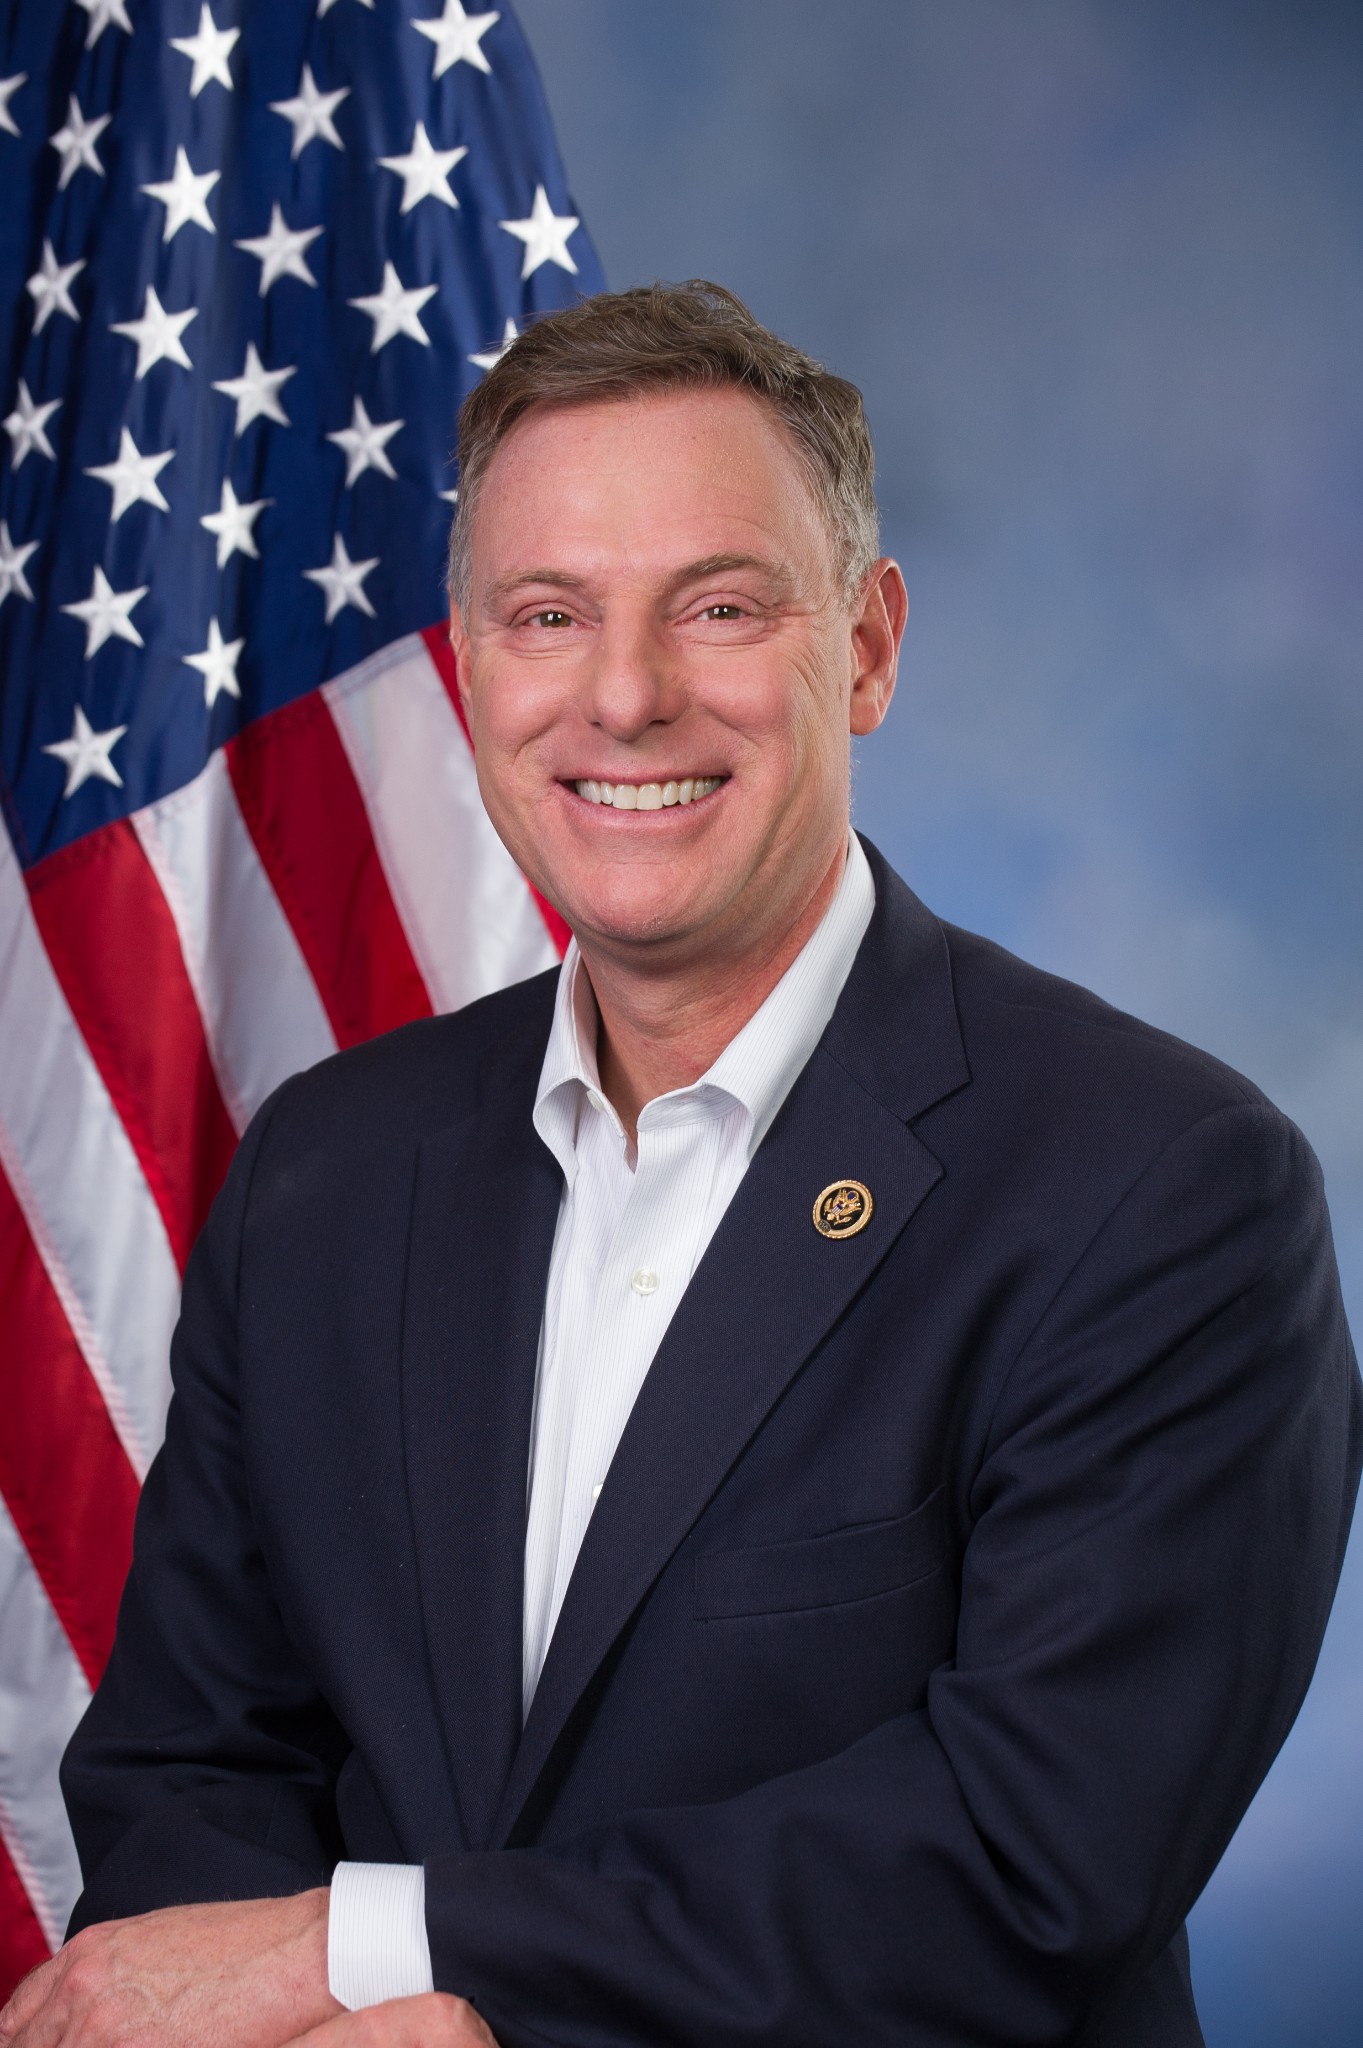 Event Recap: National Security, Climate Resilience & Environmental Protection – A Conversation with Congressman Scott Peters